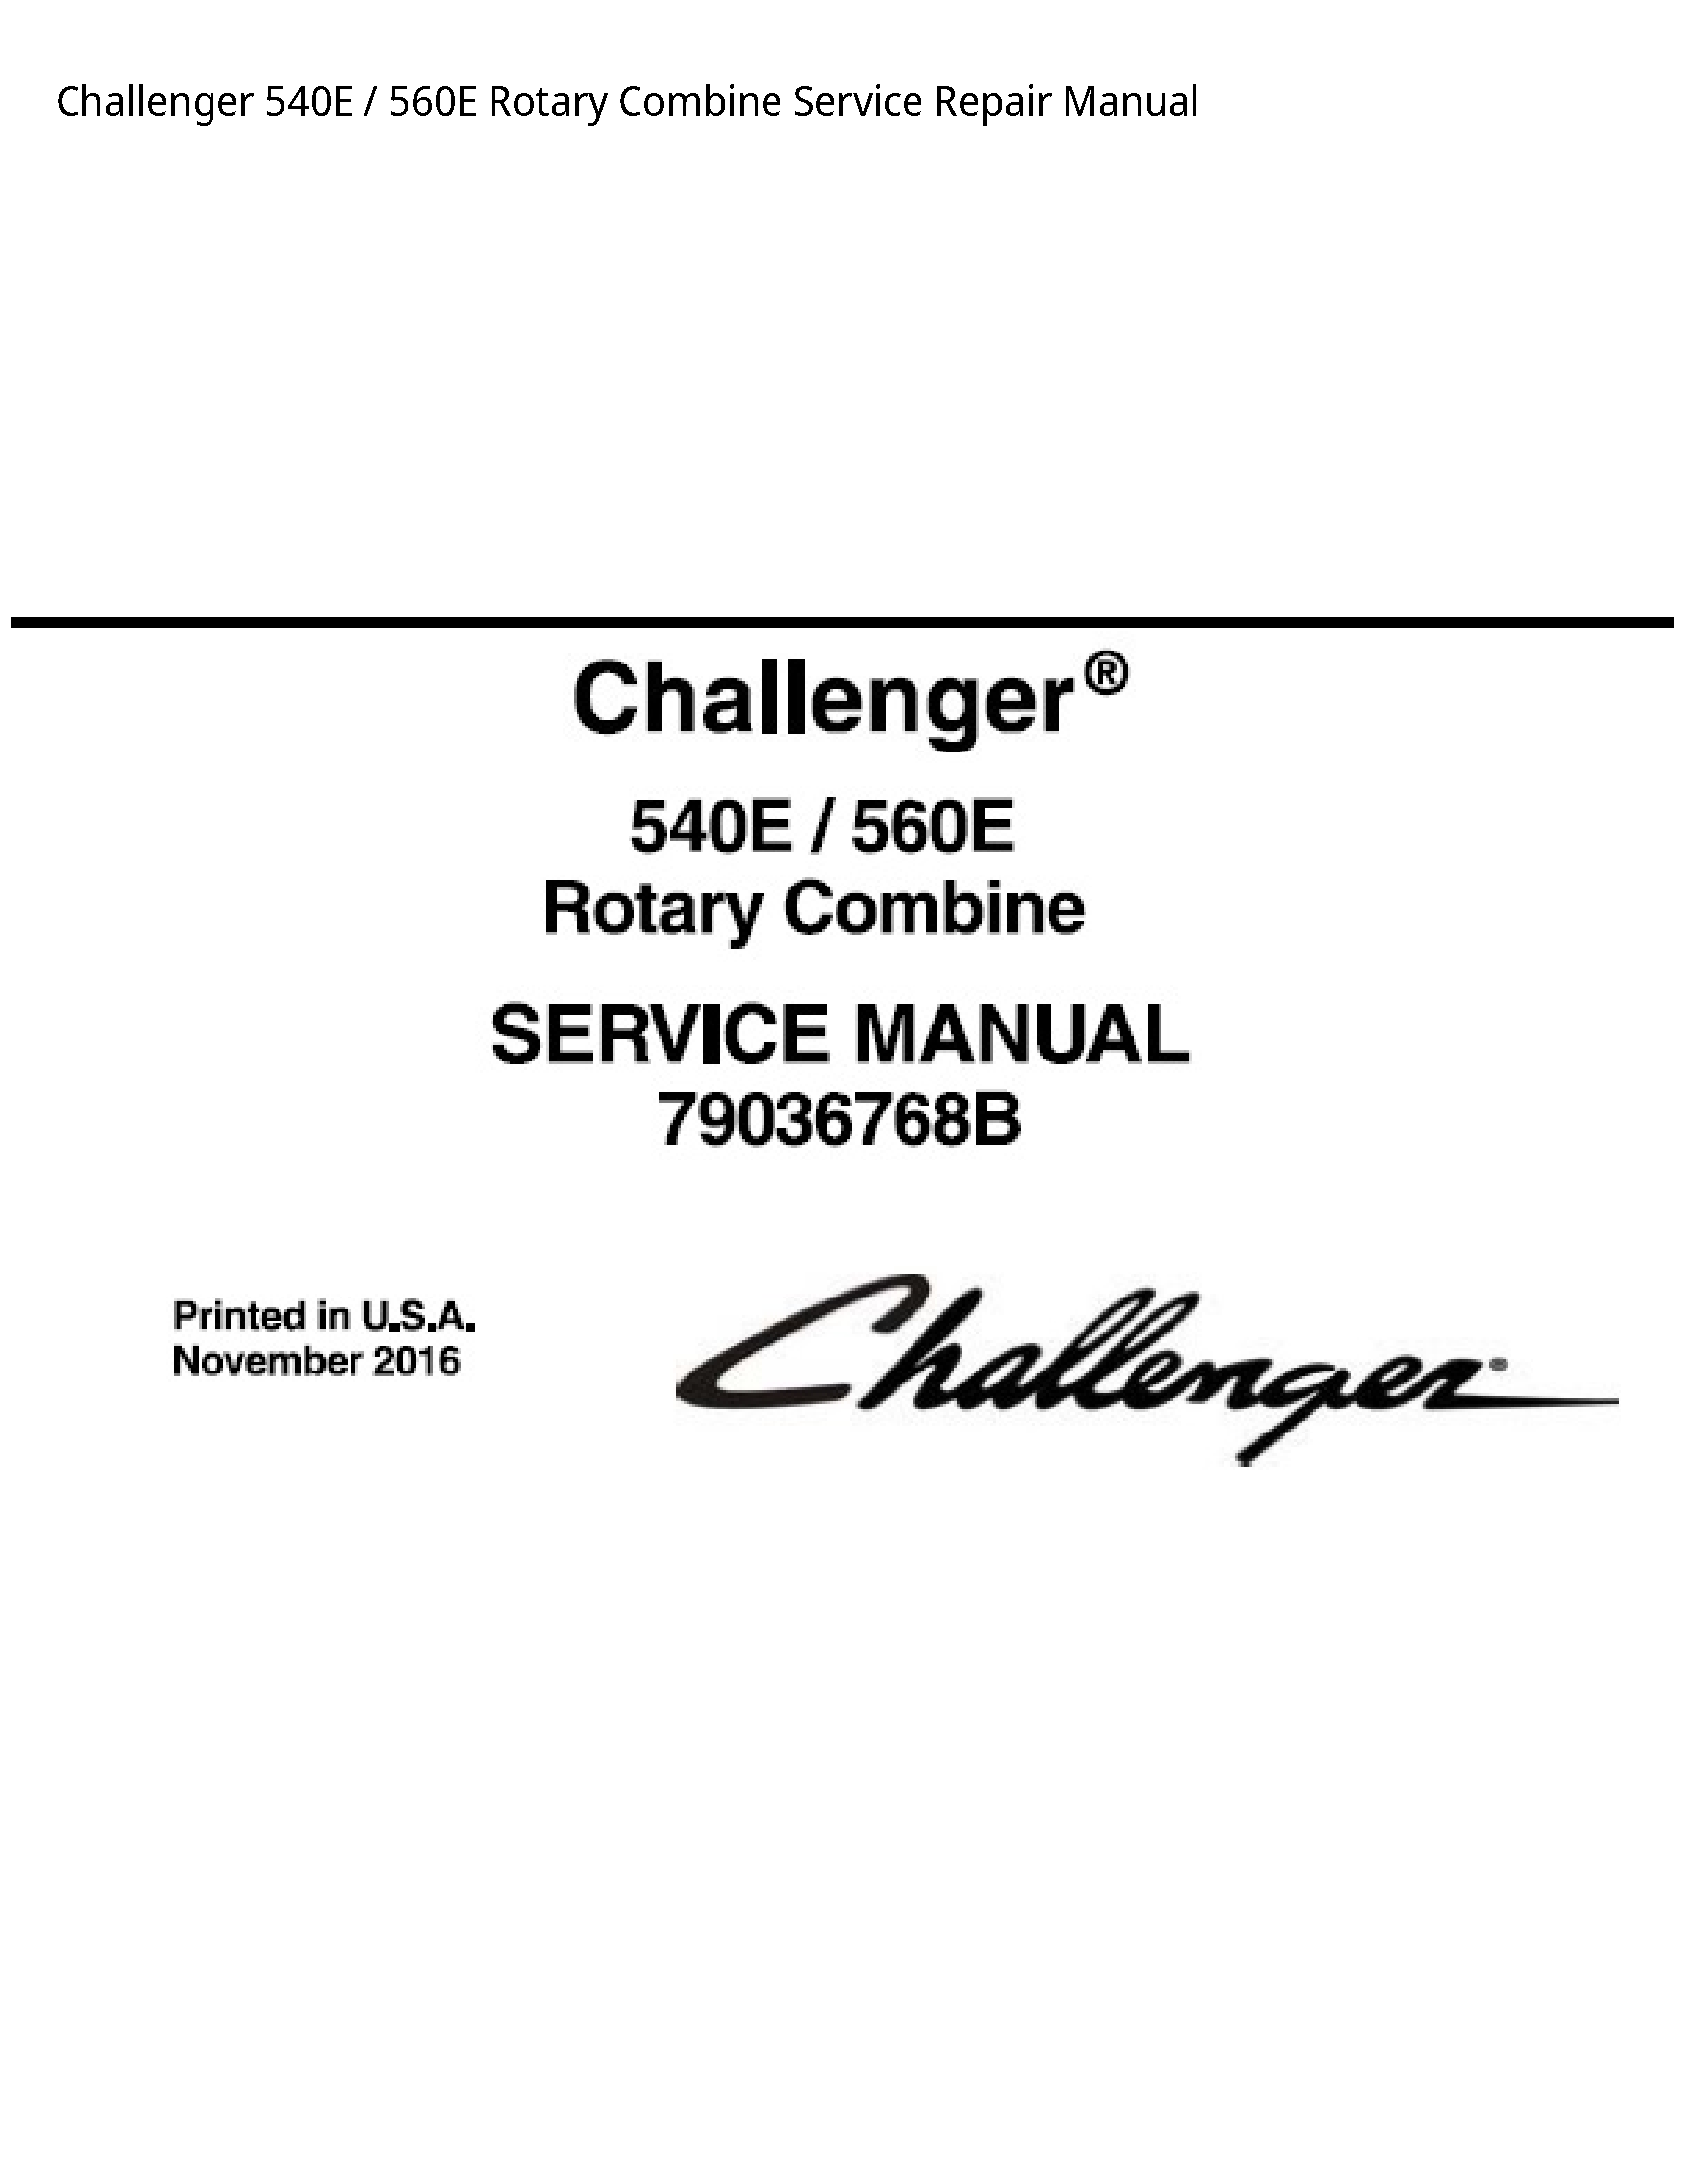 Challenger 540E Rotary Combine manual